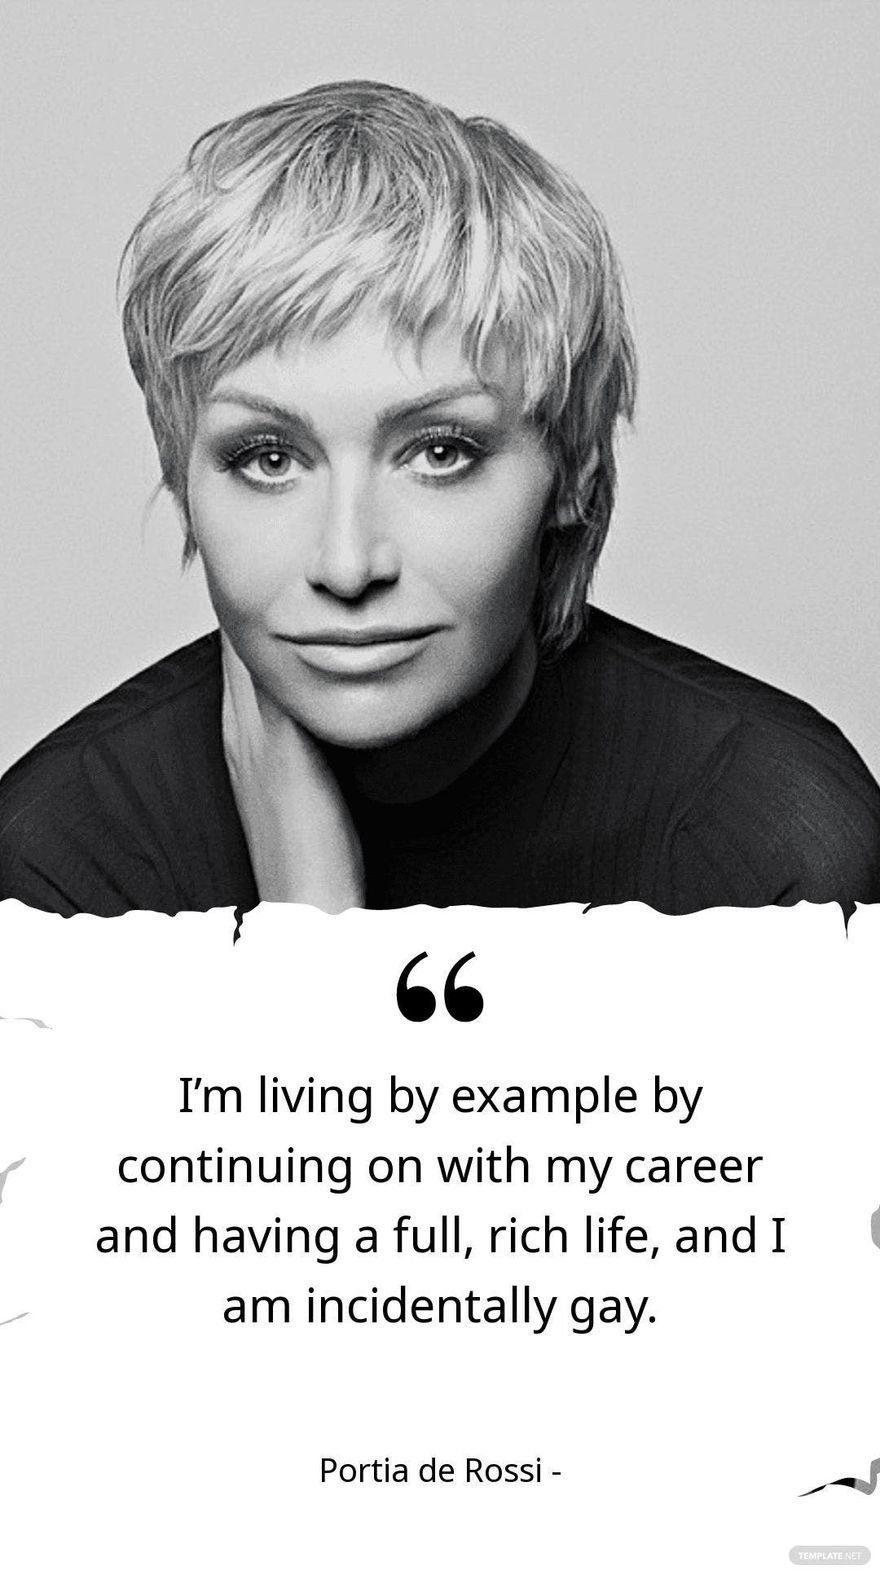 Portia de Rossi - I’m living by example by continuing on with my career and having a full, rich life, and I am incidentally gay. in JPG